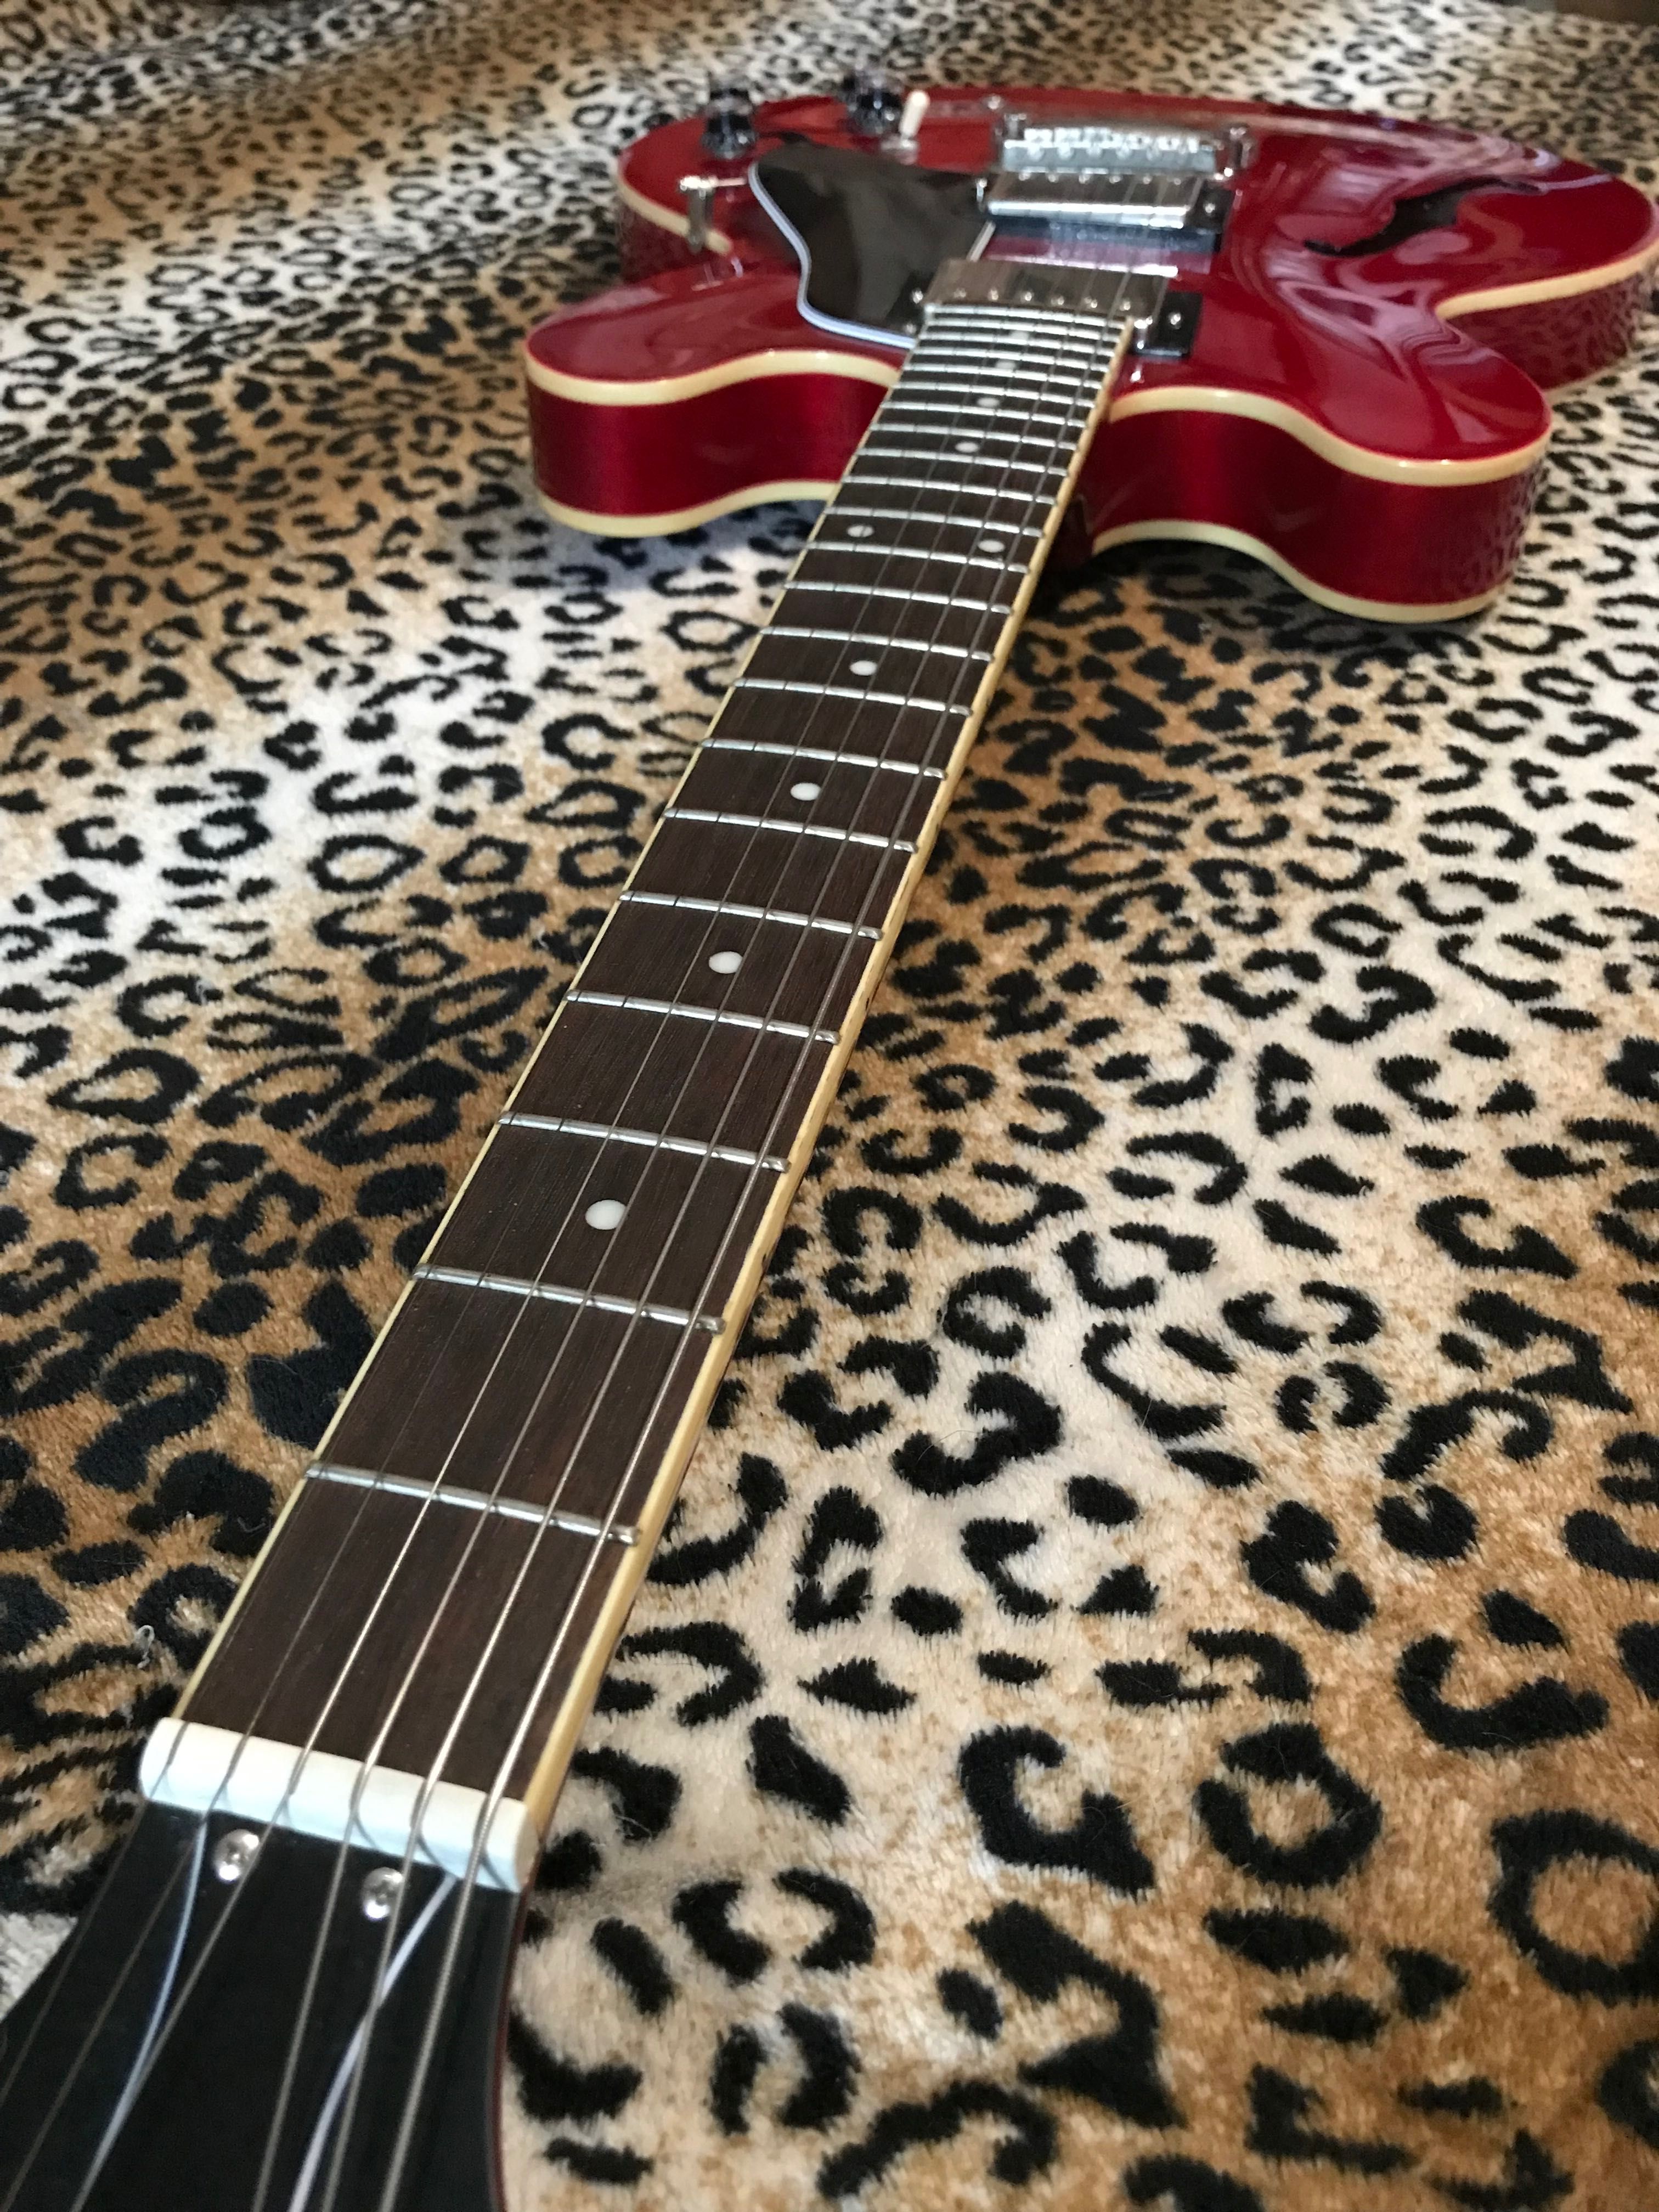 Epiphone ES-335 cherry red inspired by Gibson series